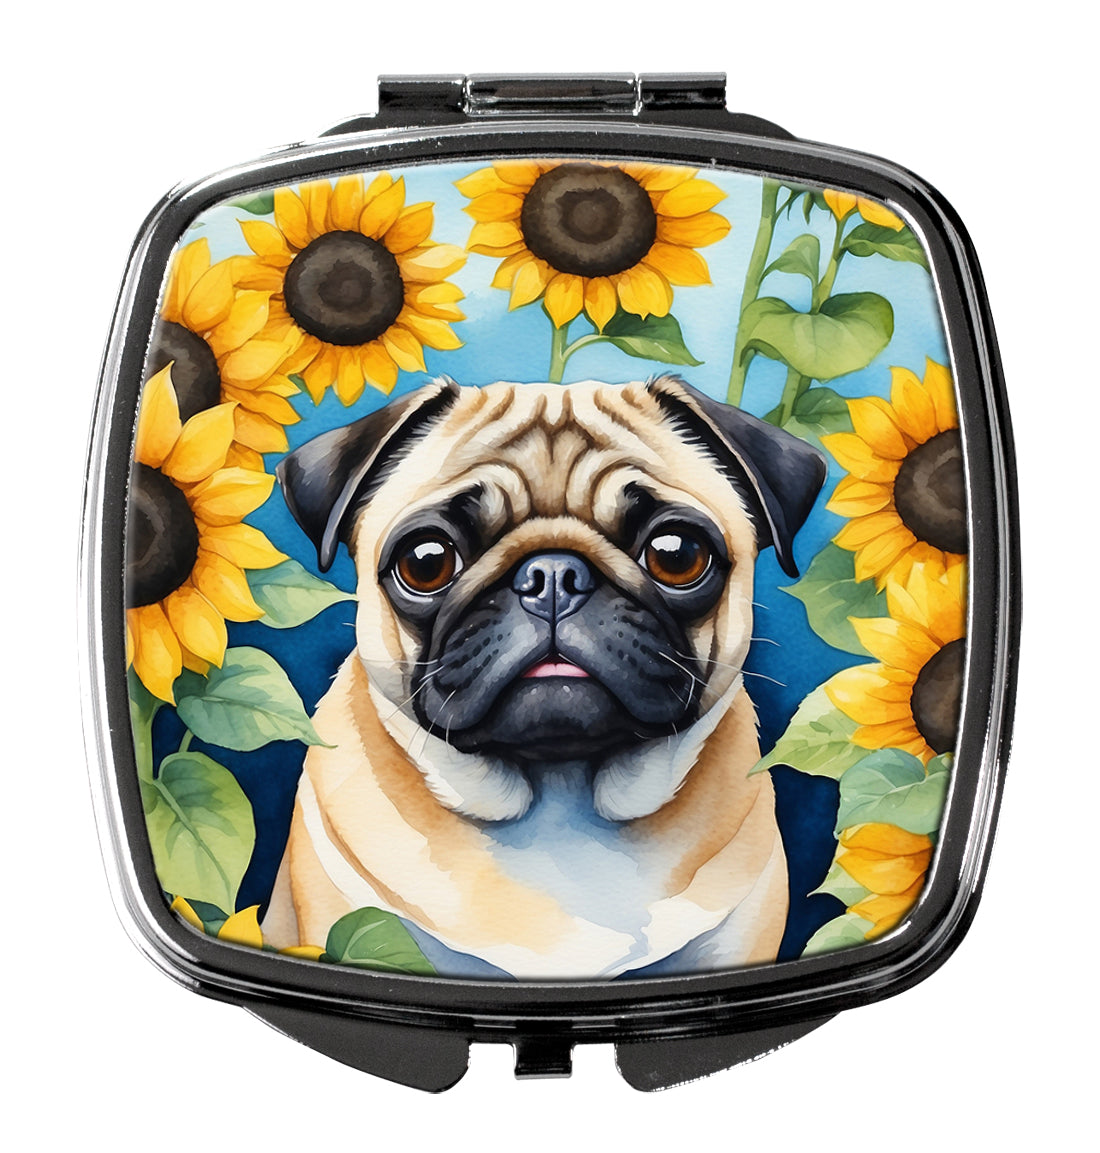 Buy this Pug in Sunflowers Compact Mirror